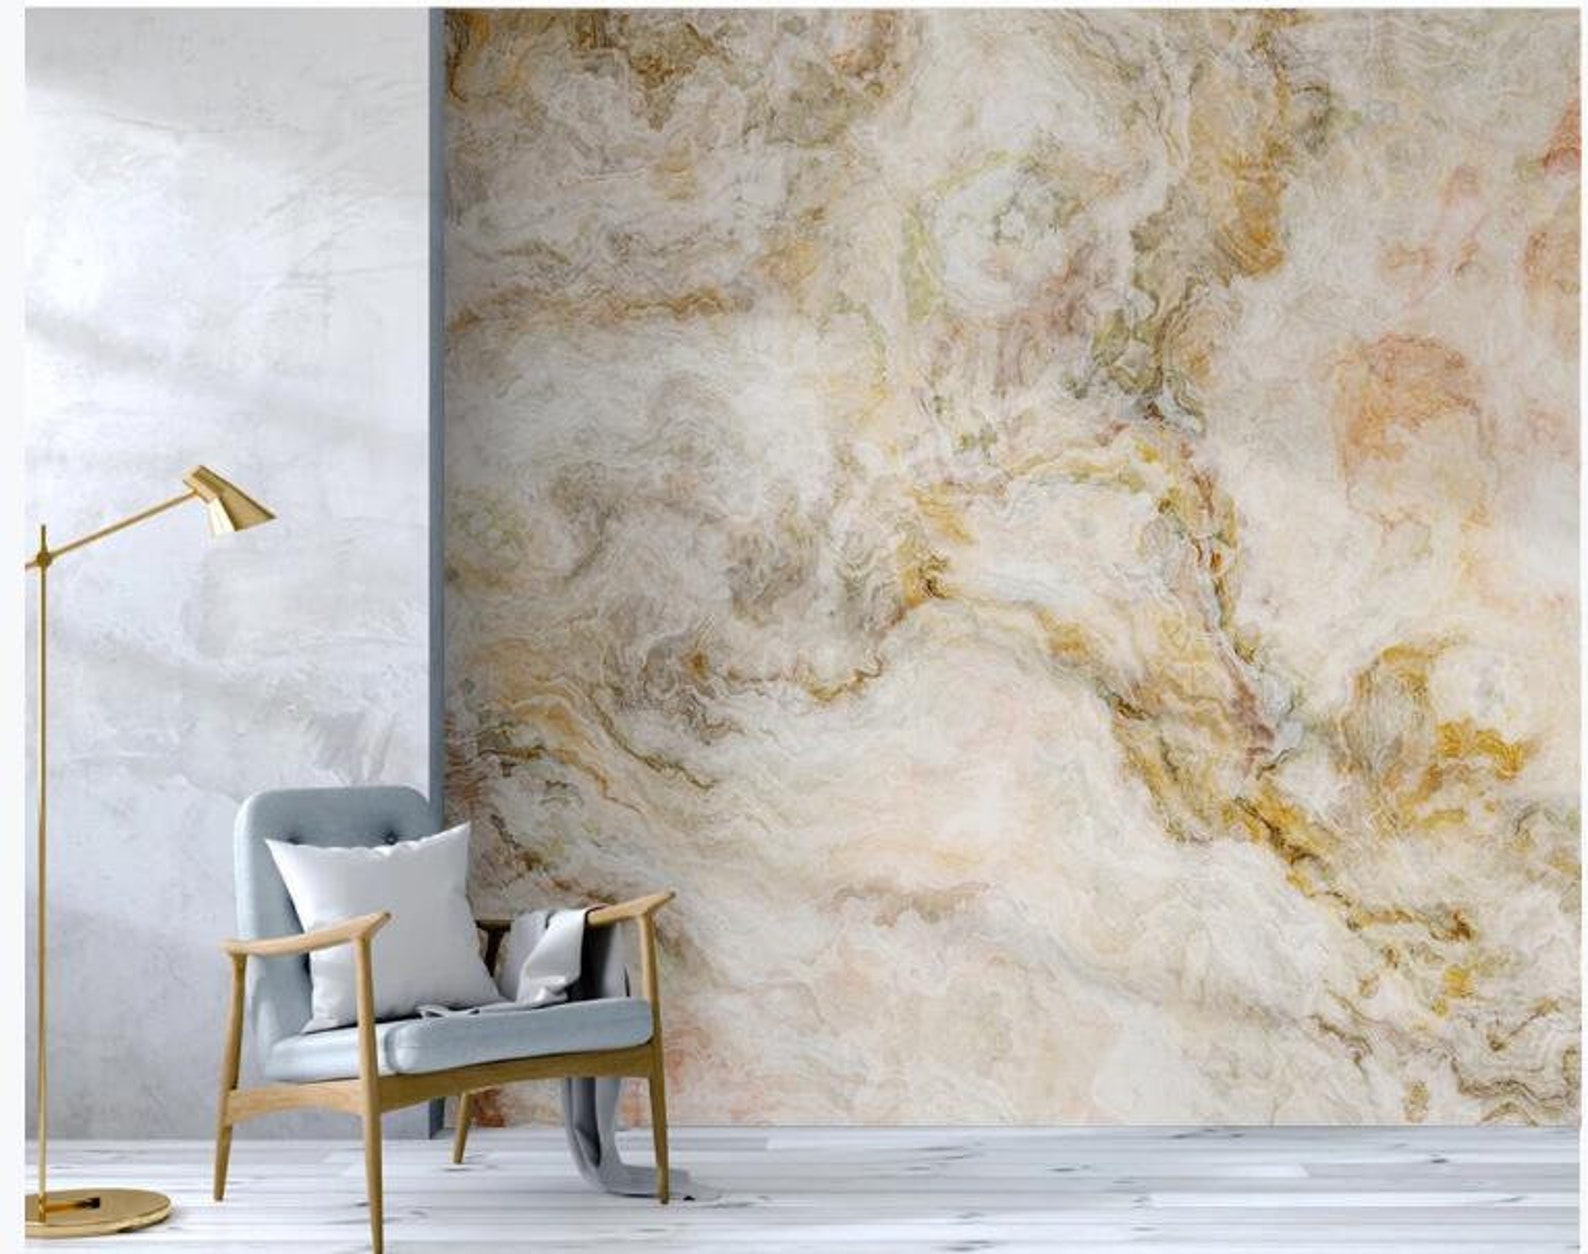 Golden Color Abstract Marble Wallpaper Wall Mural Marble | Etsy